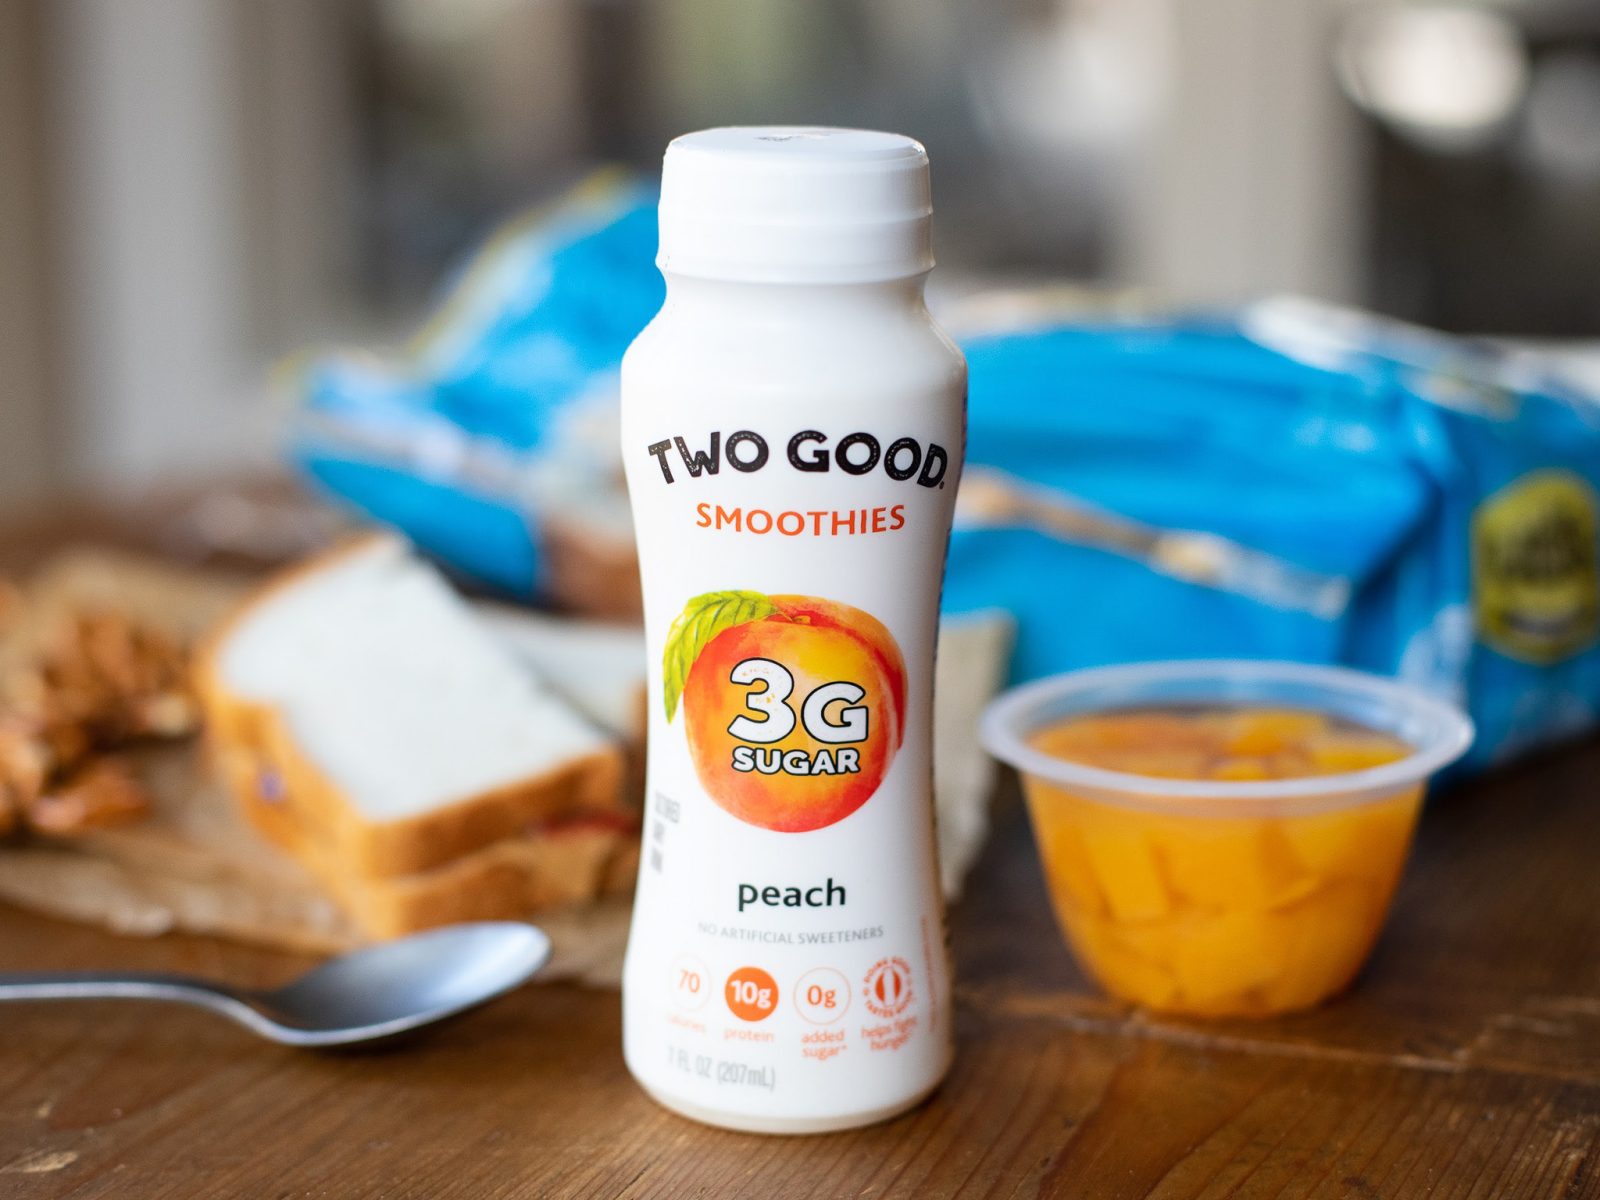 Get Two Good Smoothies For 50¢ At Kroger